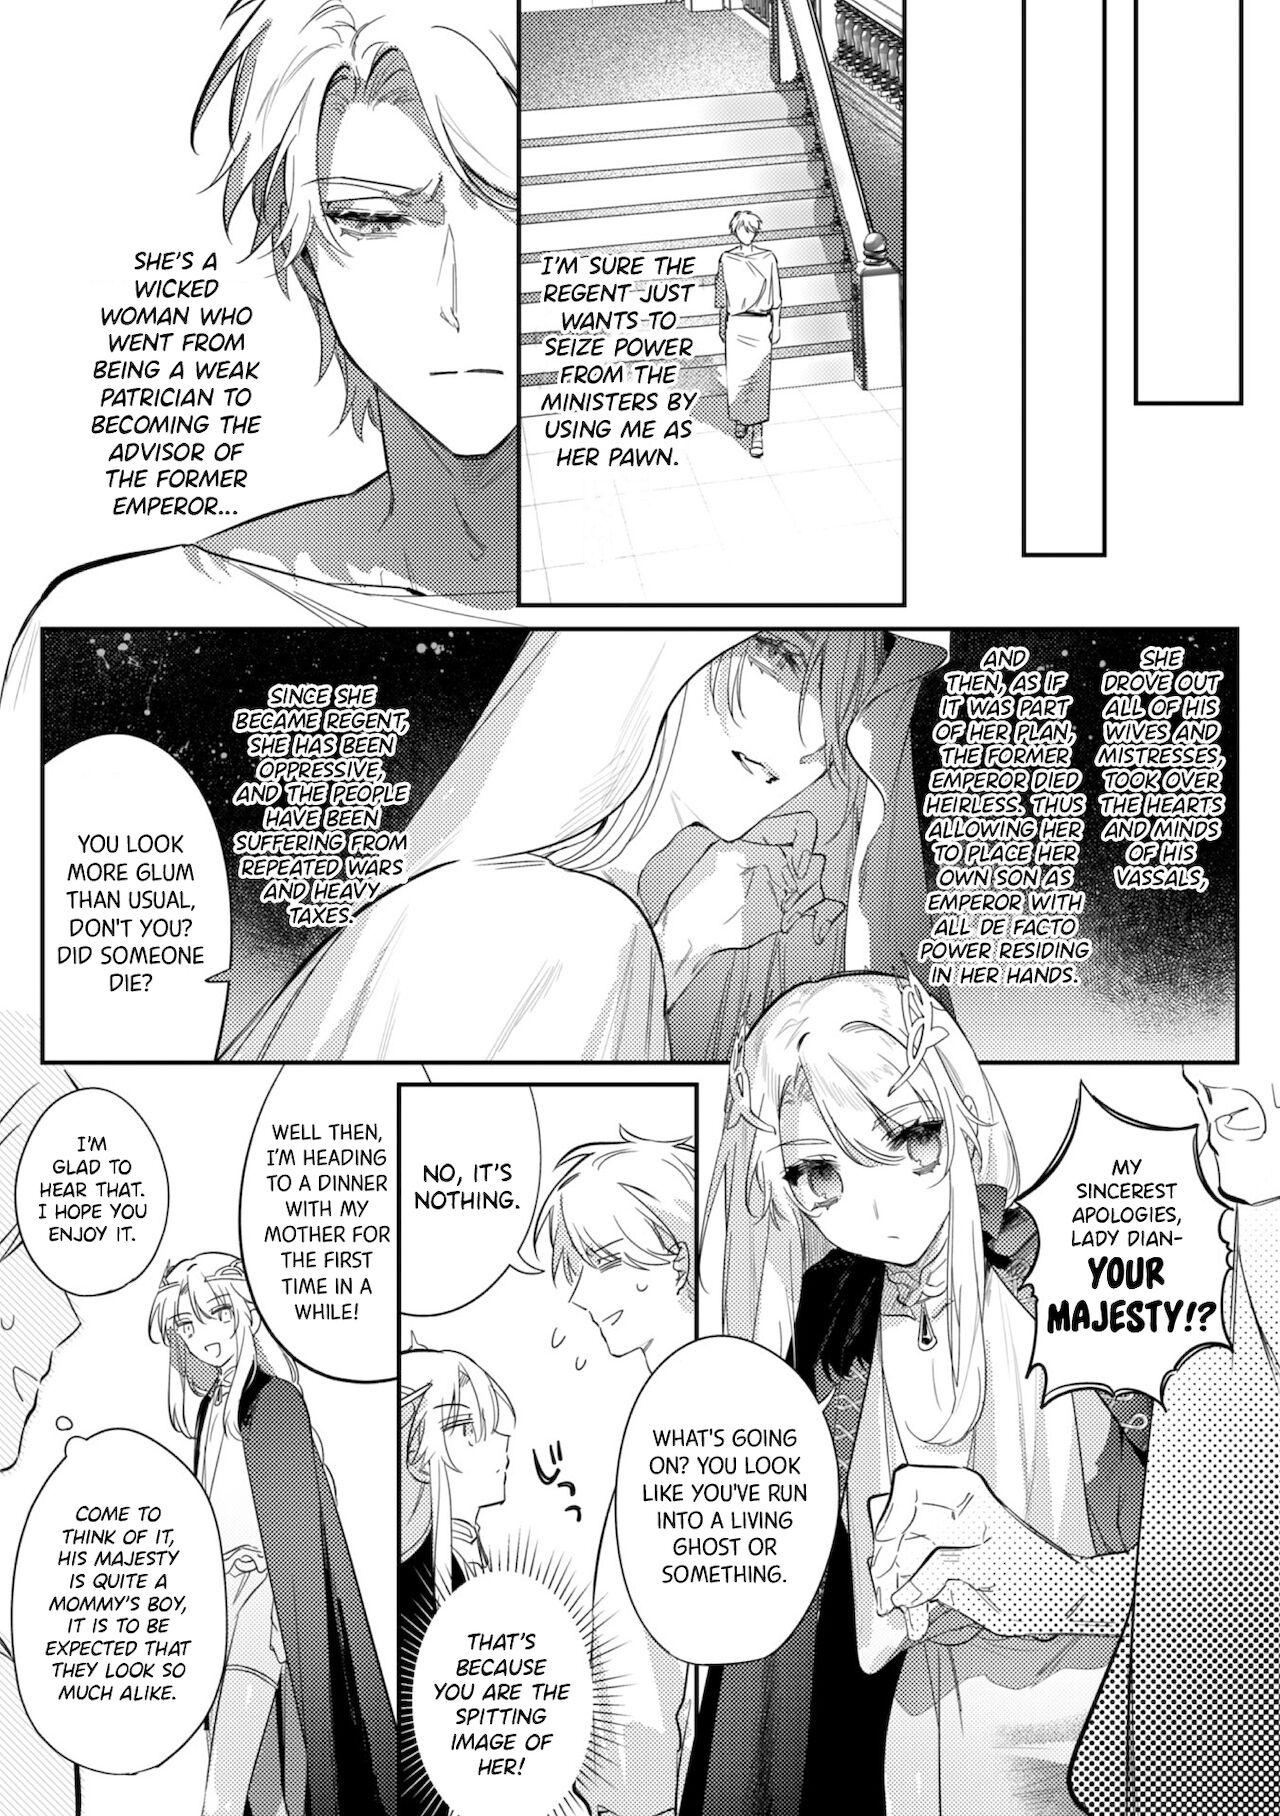 Harcore [Hagiyoshi] Intou Kyuuteishi ~Intei to Yobareta Bishounen~ Ch. 3 | Records of the Lascivious Court ~The Beautiful Boy Who Was Called the “Licentious Emperor”~ Ch. 3 [English] [Black Grimoires] Gym - Page 3